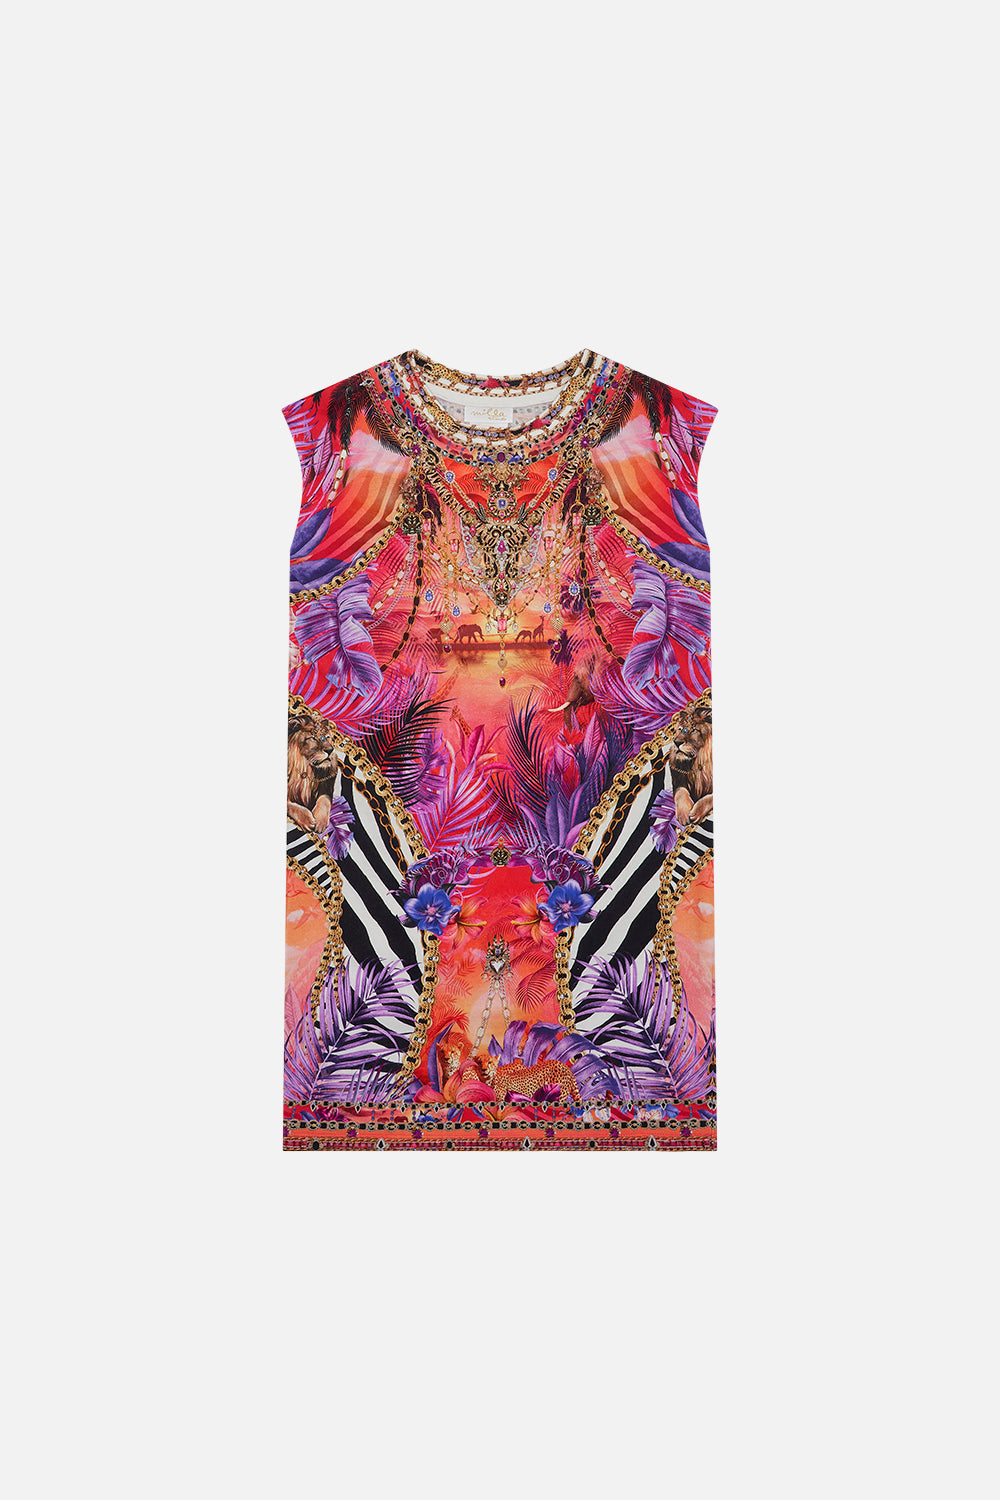 Product view of CAMILLA kids pink printed dress in Wild Loving print